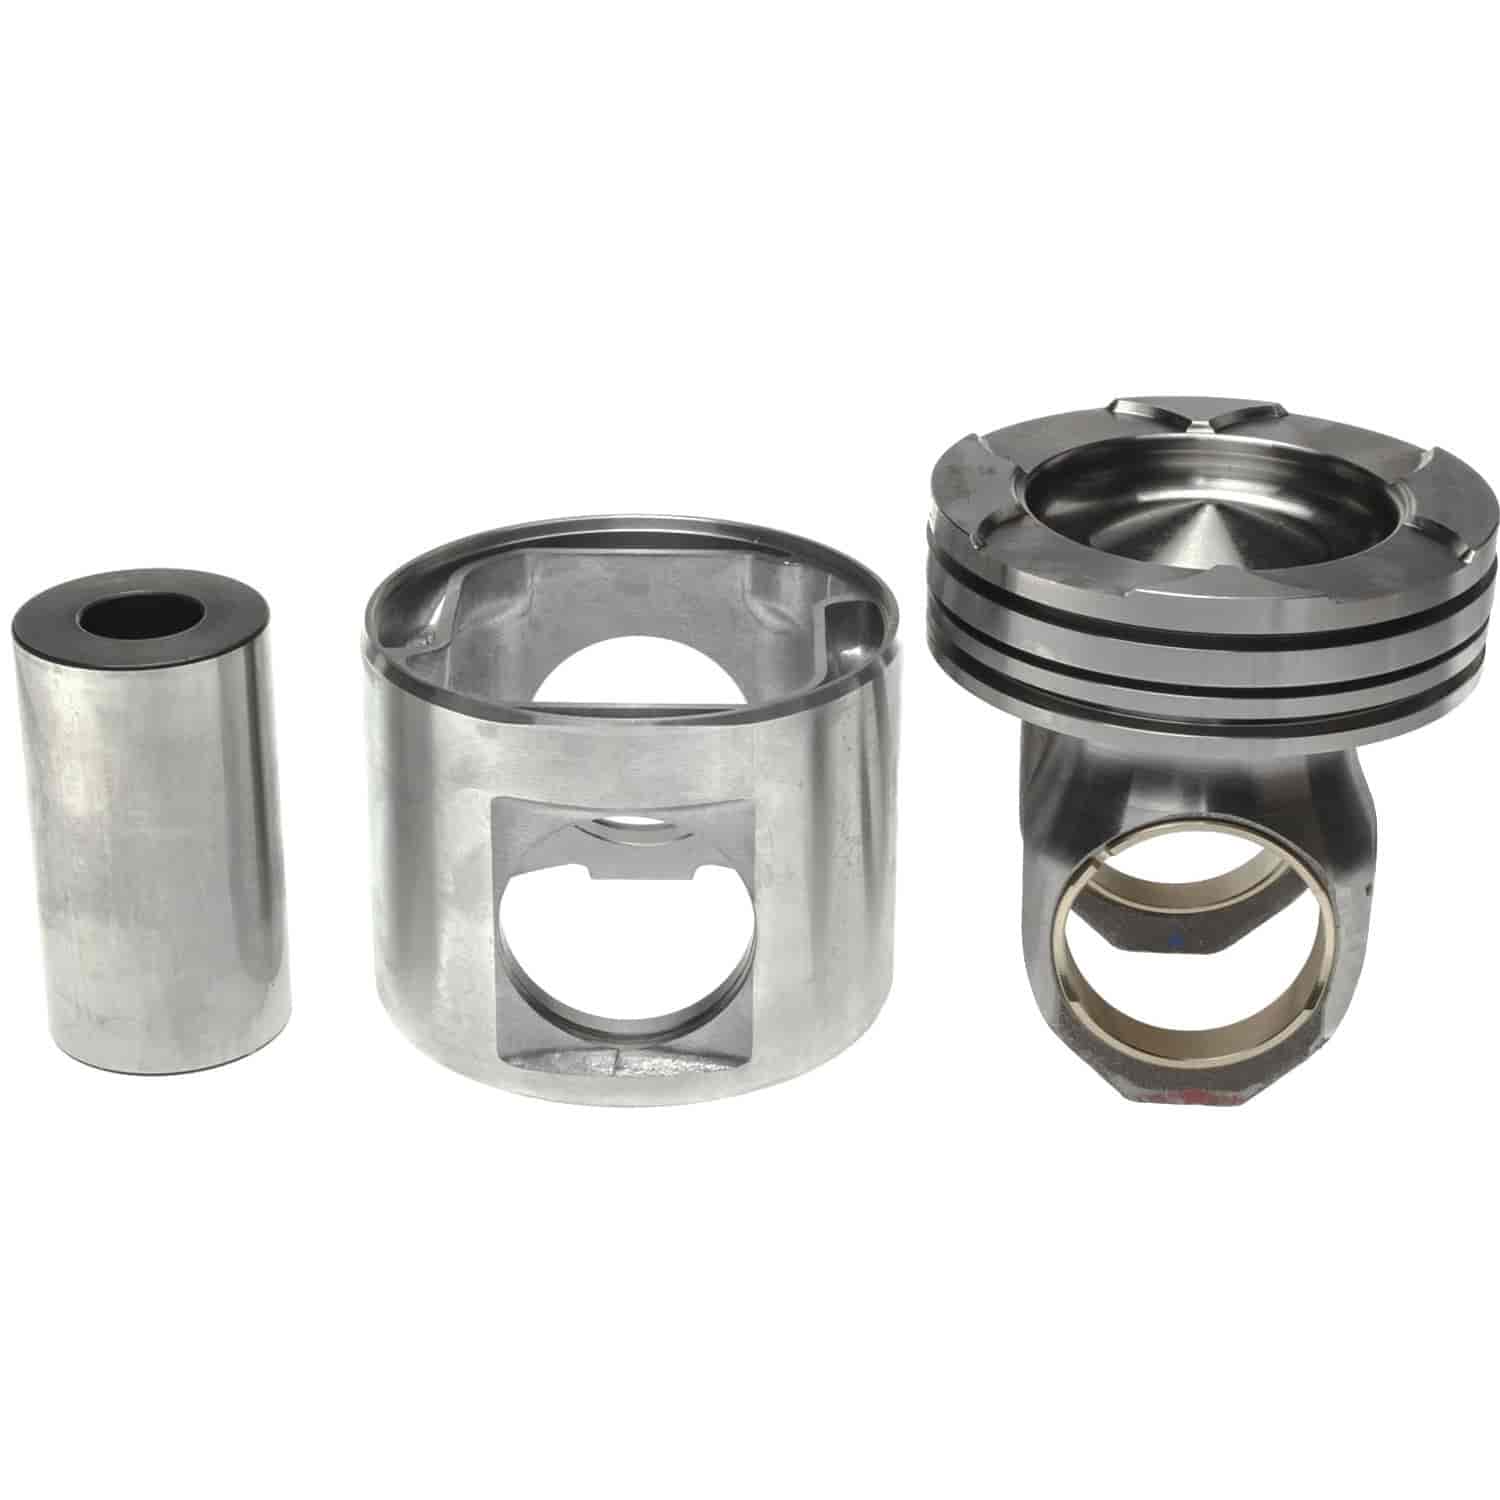 Piston Assembly for Cummins N14 Engines. Piston Pin and Clip assembly